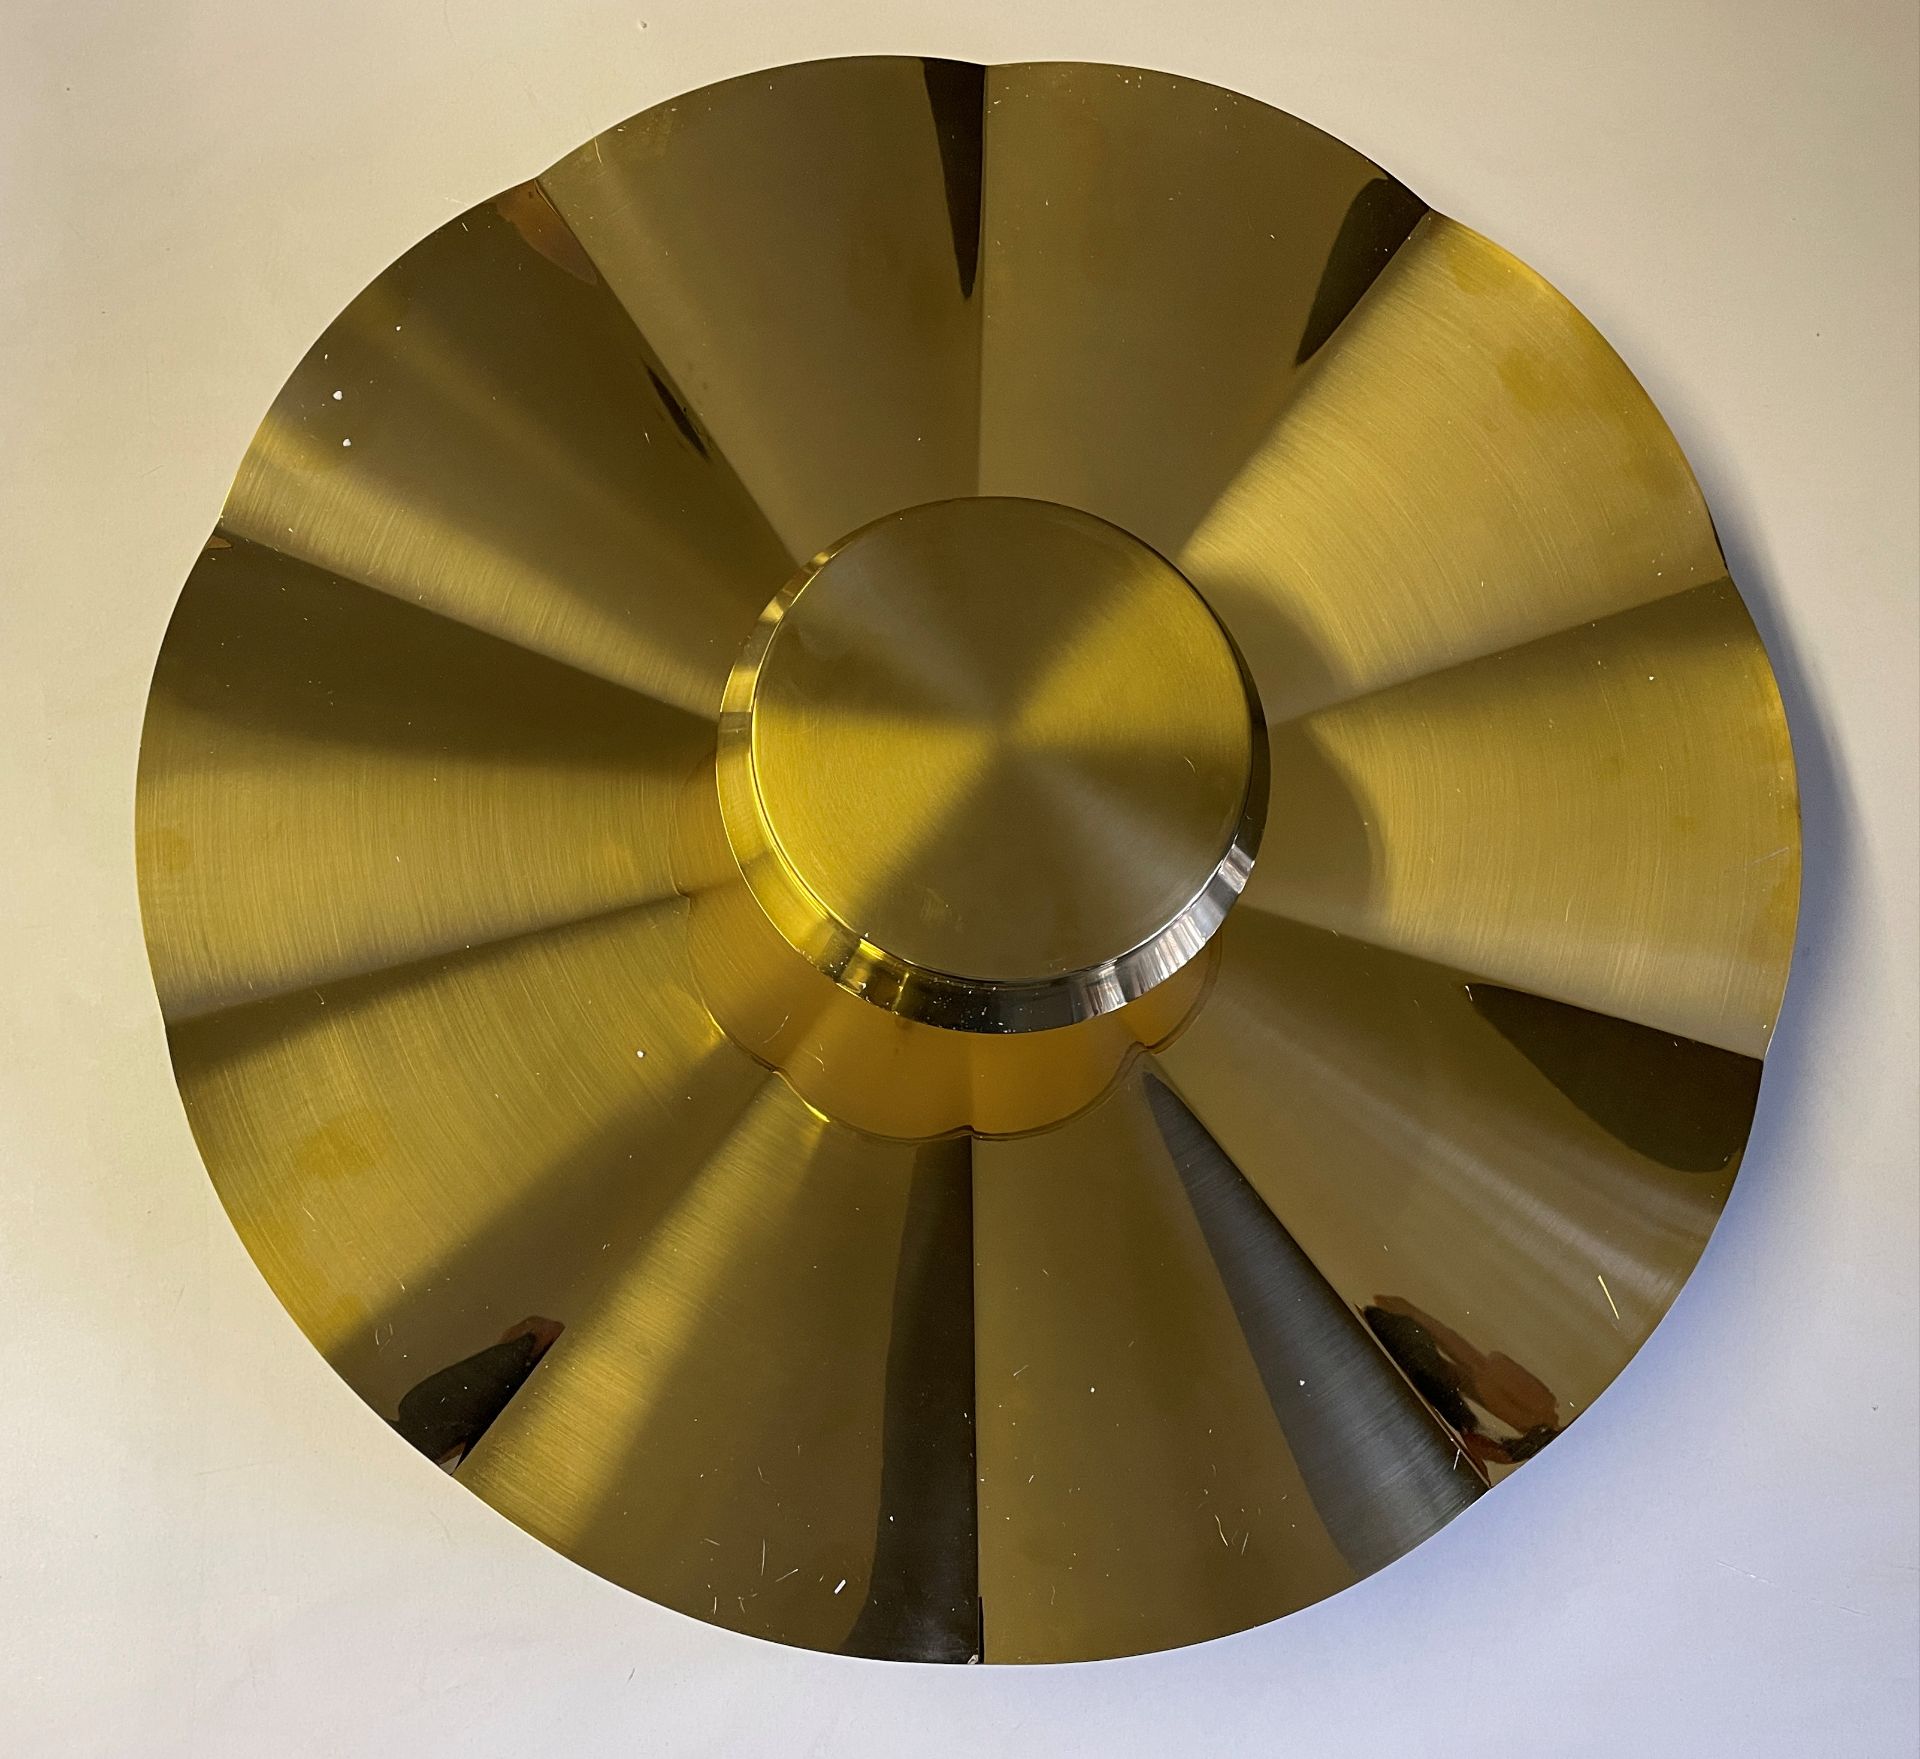 1 x Chelsom Ceiling Pendent in Polished Brass in a Drum Symbol shape 50cm Diameter x Height to ceil - Image 3 of 9